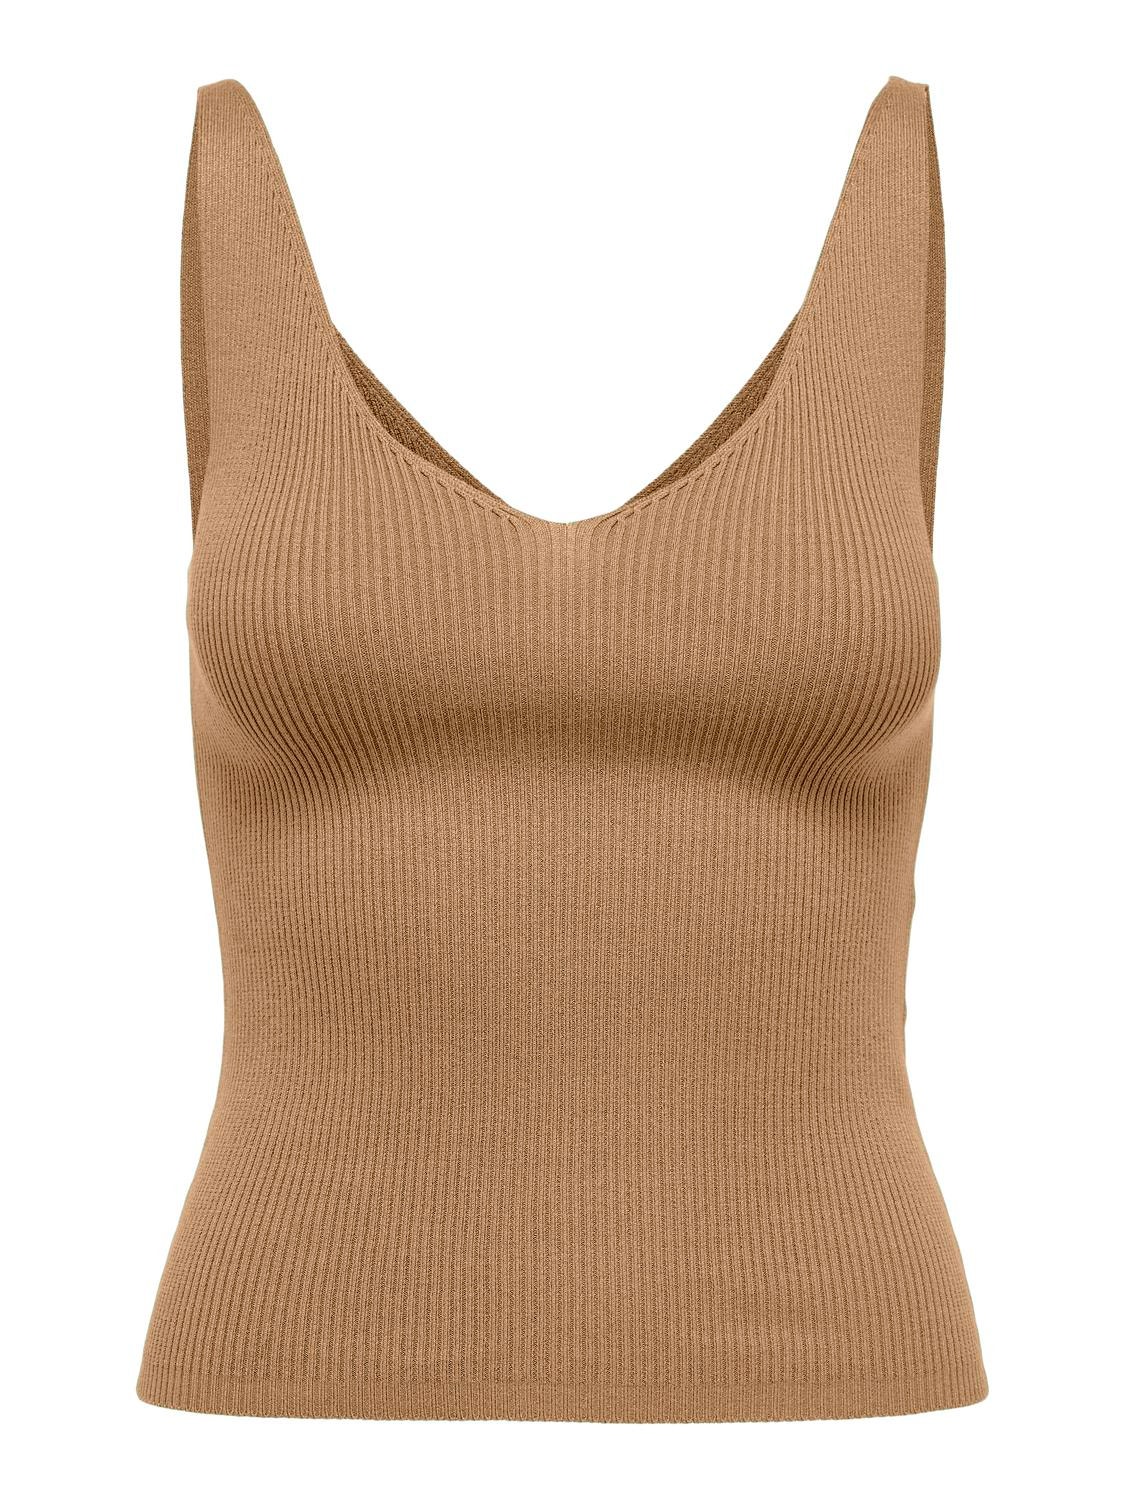 ONLY V-hals Mouwloze top -Indian Tan - 15180497